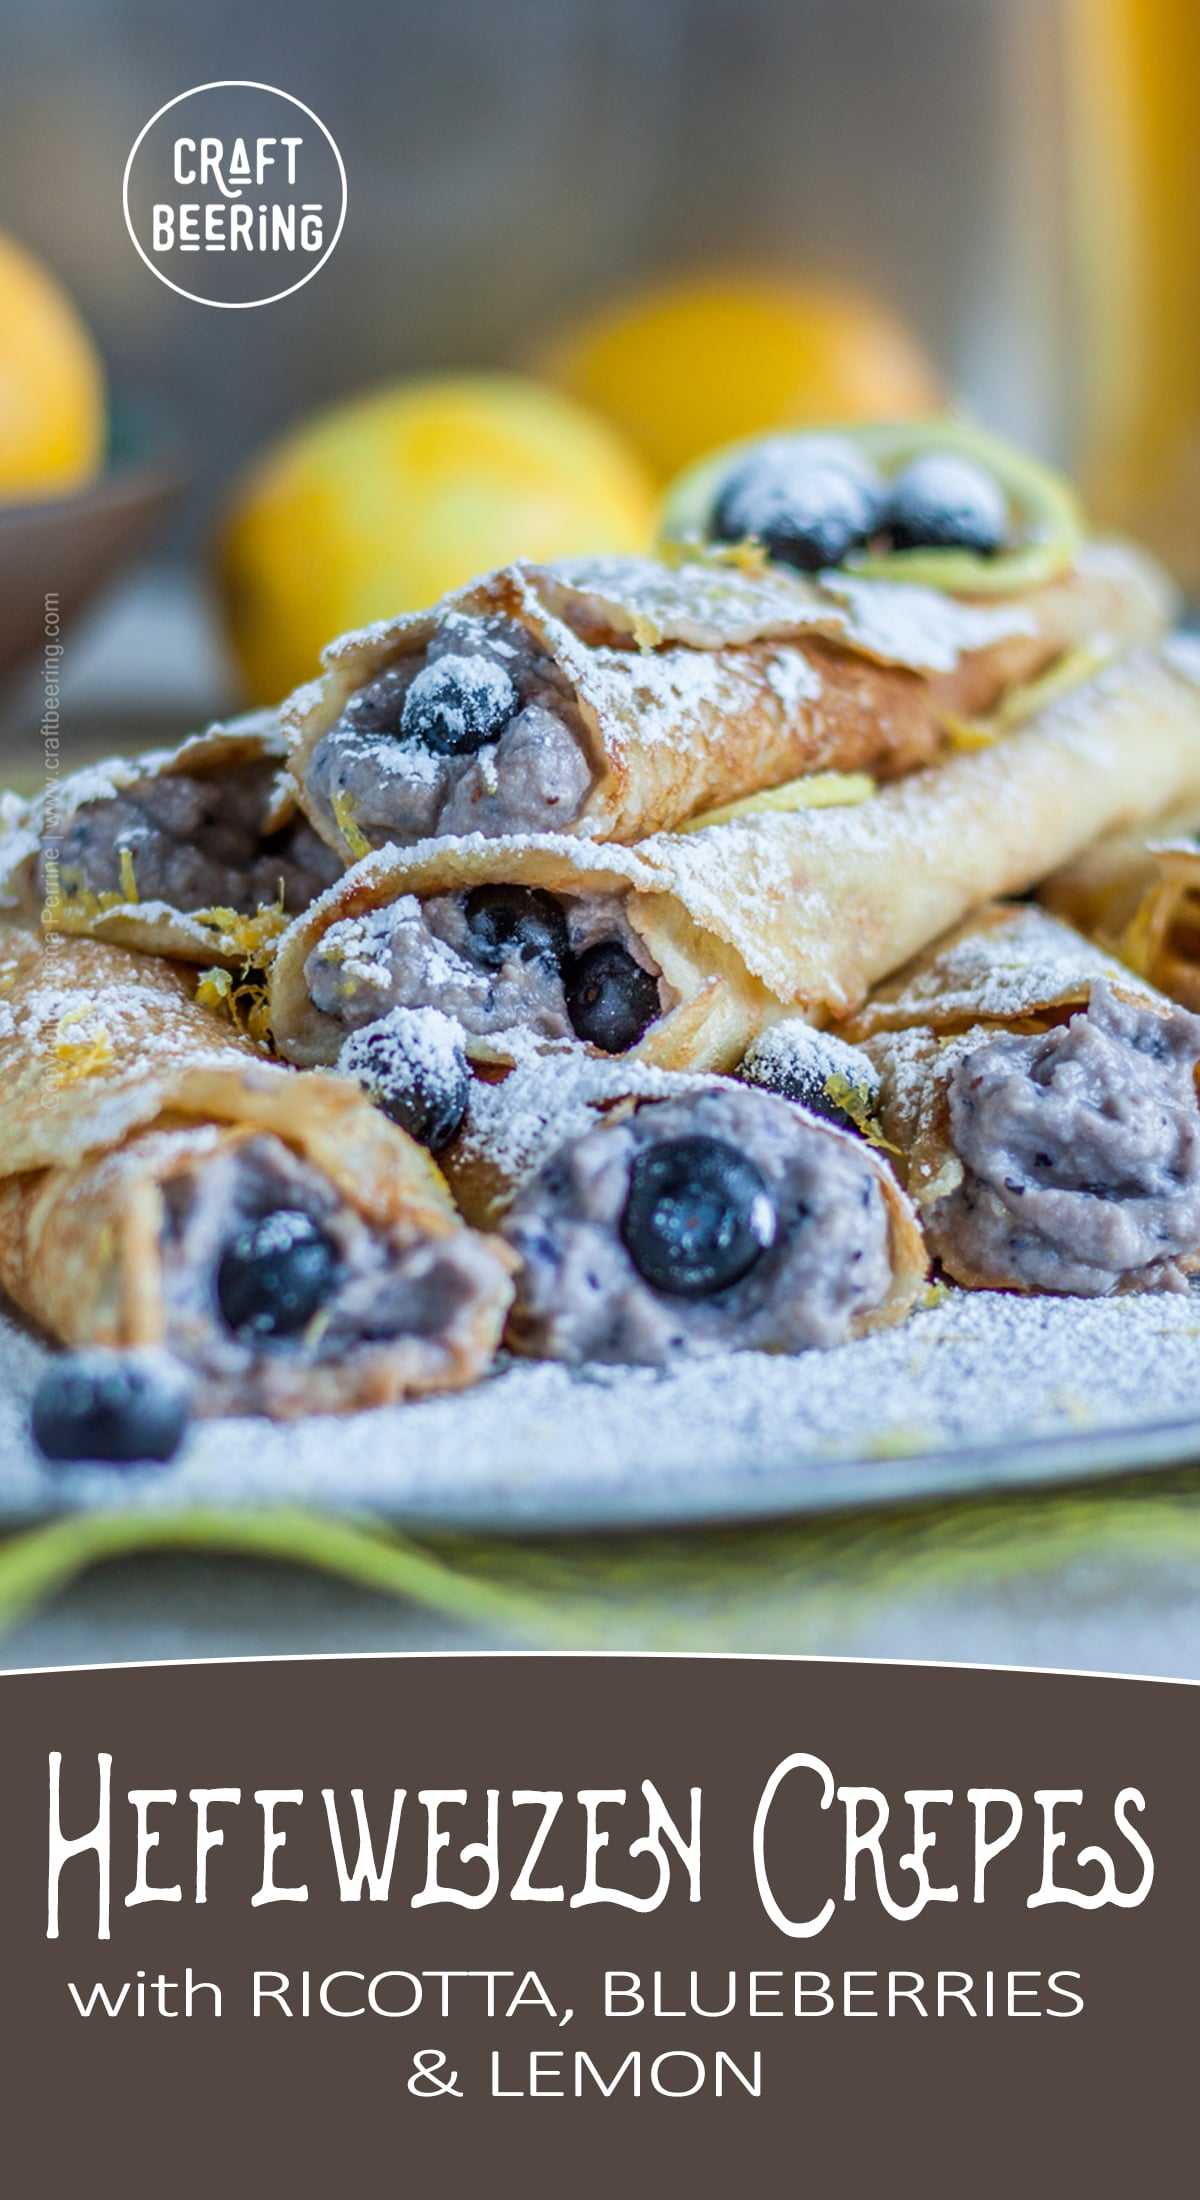 Beer crepes with Hefeweizen batter and ricotta, blueberries and lemon filling. #crepes #beercrepes #beerbatter #cookingwithbeer #crepebatter #crepesrecipe